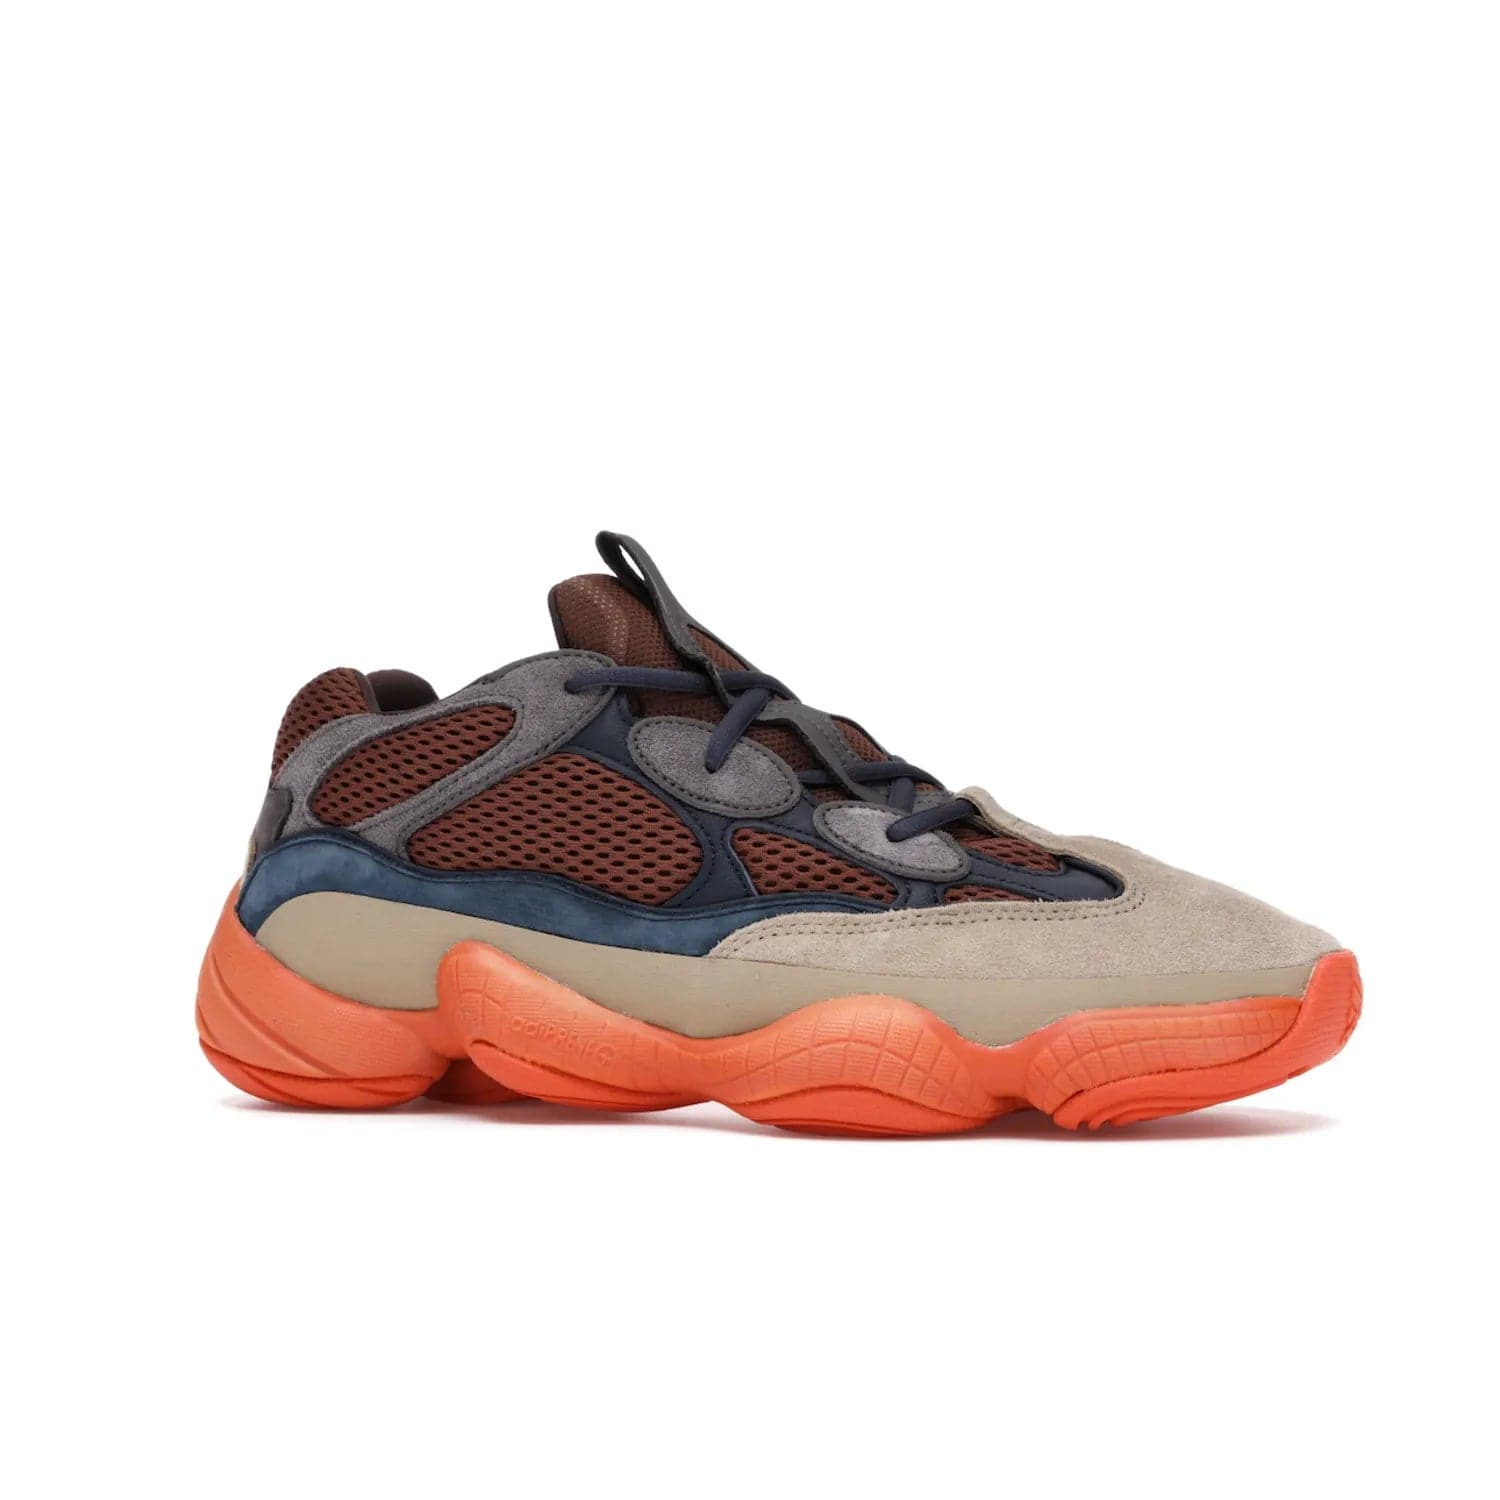 adidas Yeezy 500 Enflame - Image 3 - Only at www.BallersClubKickz.com - Step into style with the adidas Yeezy 500 Enflame. Mix of mesh, leather, and suede layered together to create tonal-brown, dark blue, & orange. Orange AdiPRENE sole provides superior cushioning & comfort. Get yours and experience maximum style.